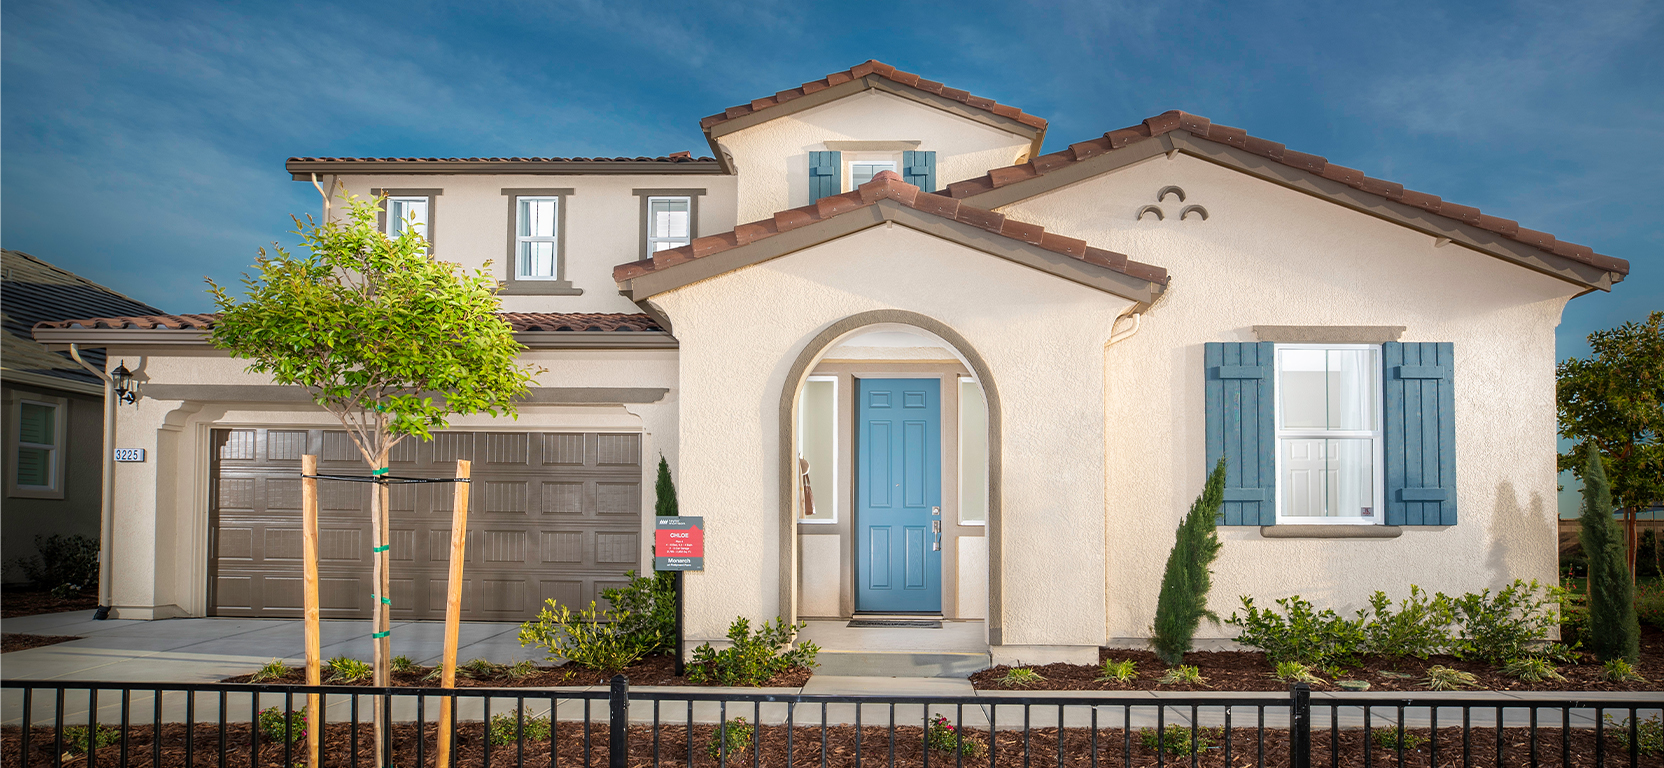 Spanish-style modern home exterior with beige stucco, attached garage, and arched entryway with blue entry door and shutters.